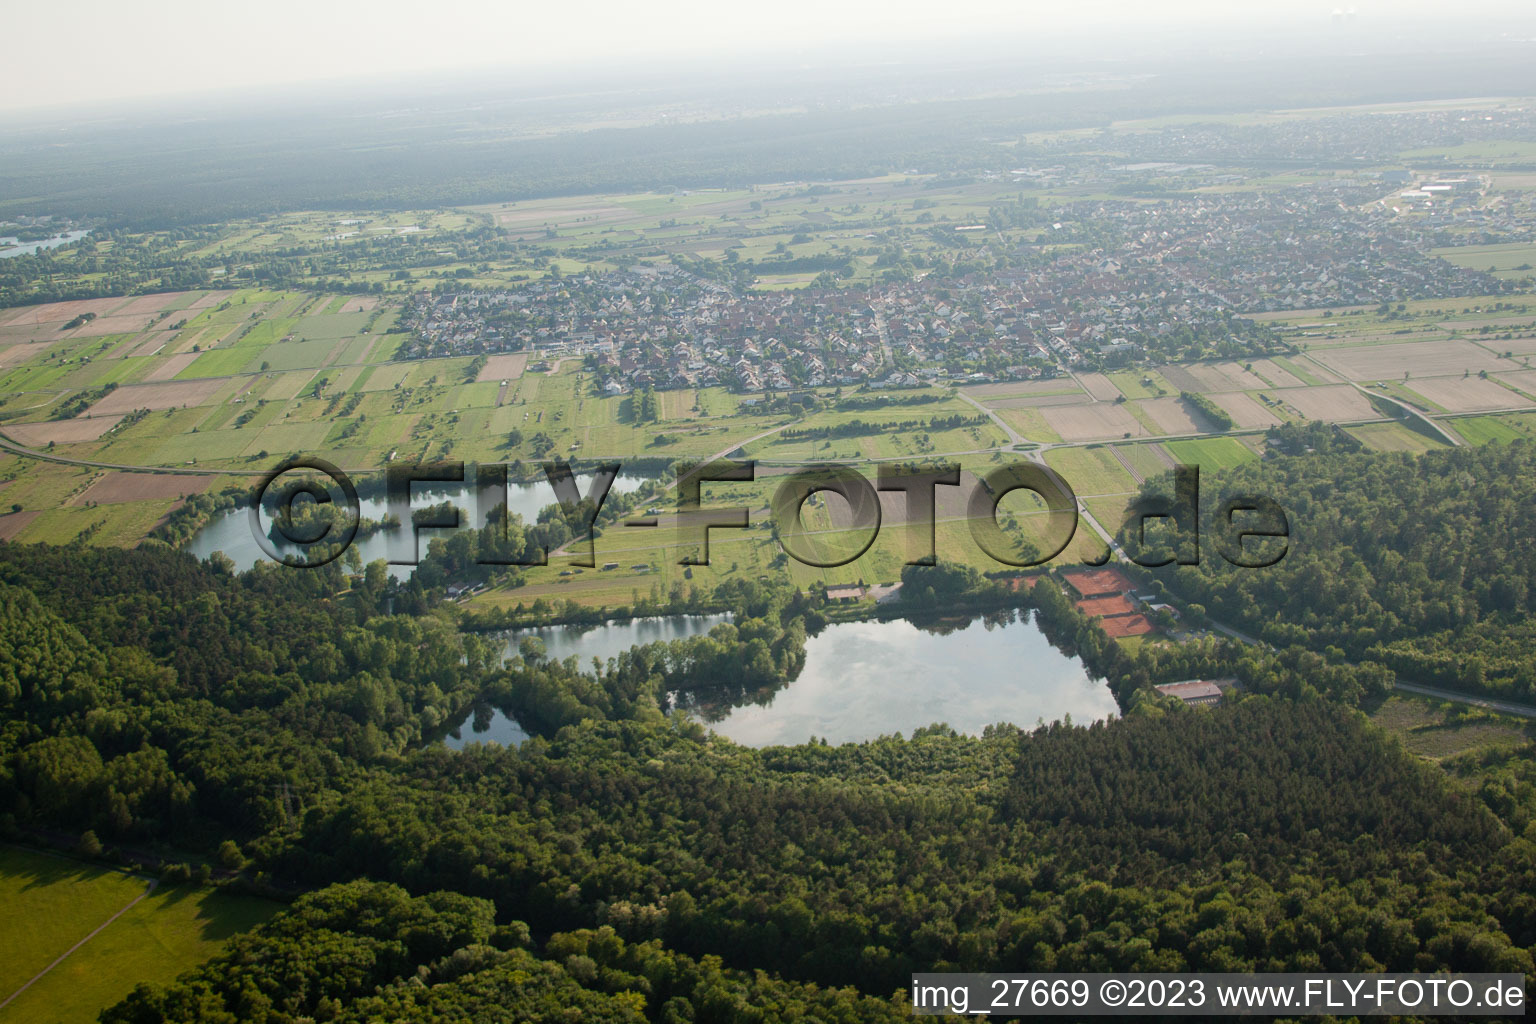 Fishing lake in the district Rot in St. Leon-Rot in the state Baden-Wuerttemberg, Germany